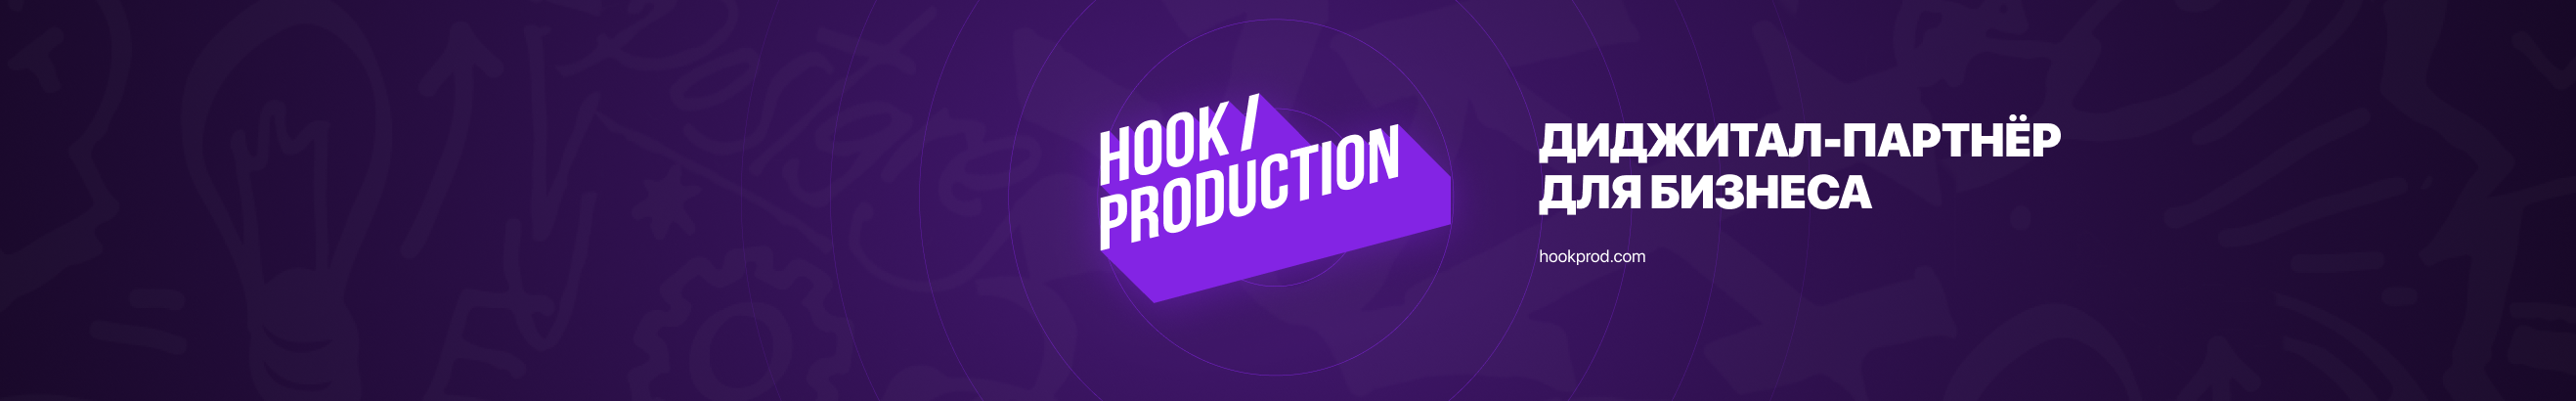 Hook Production's profile banner